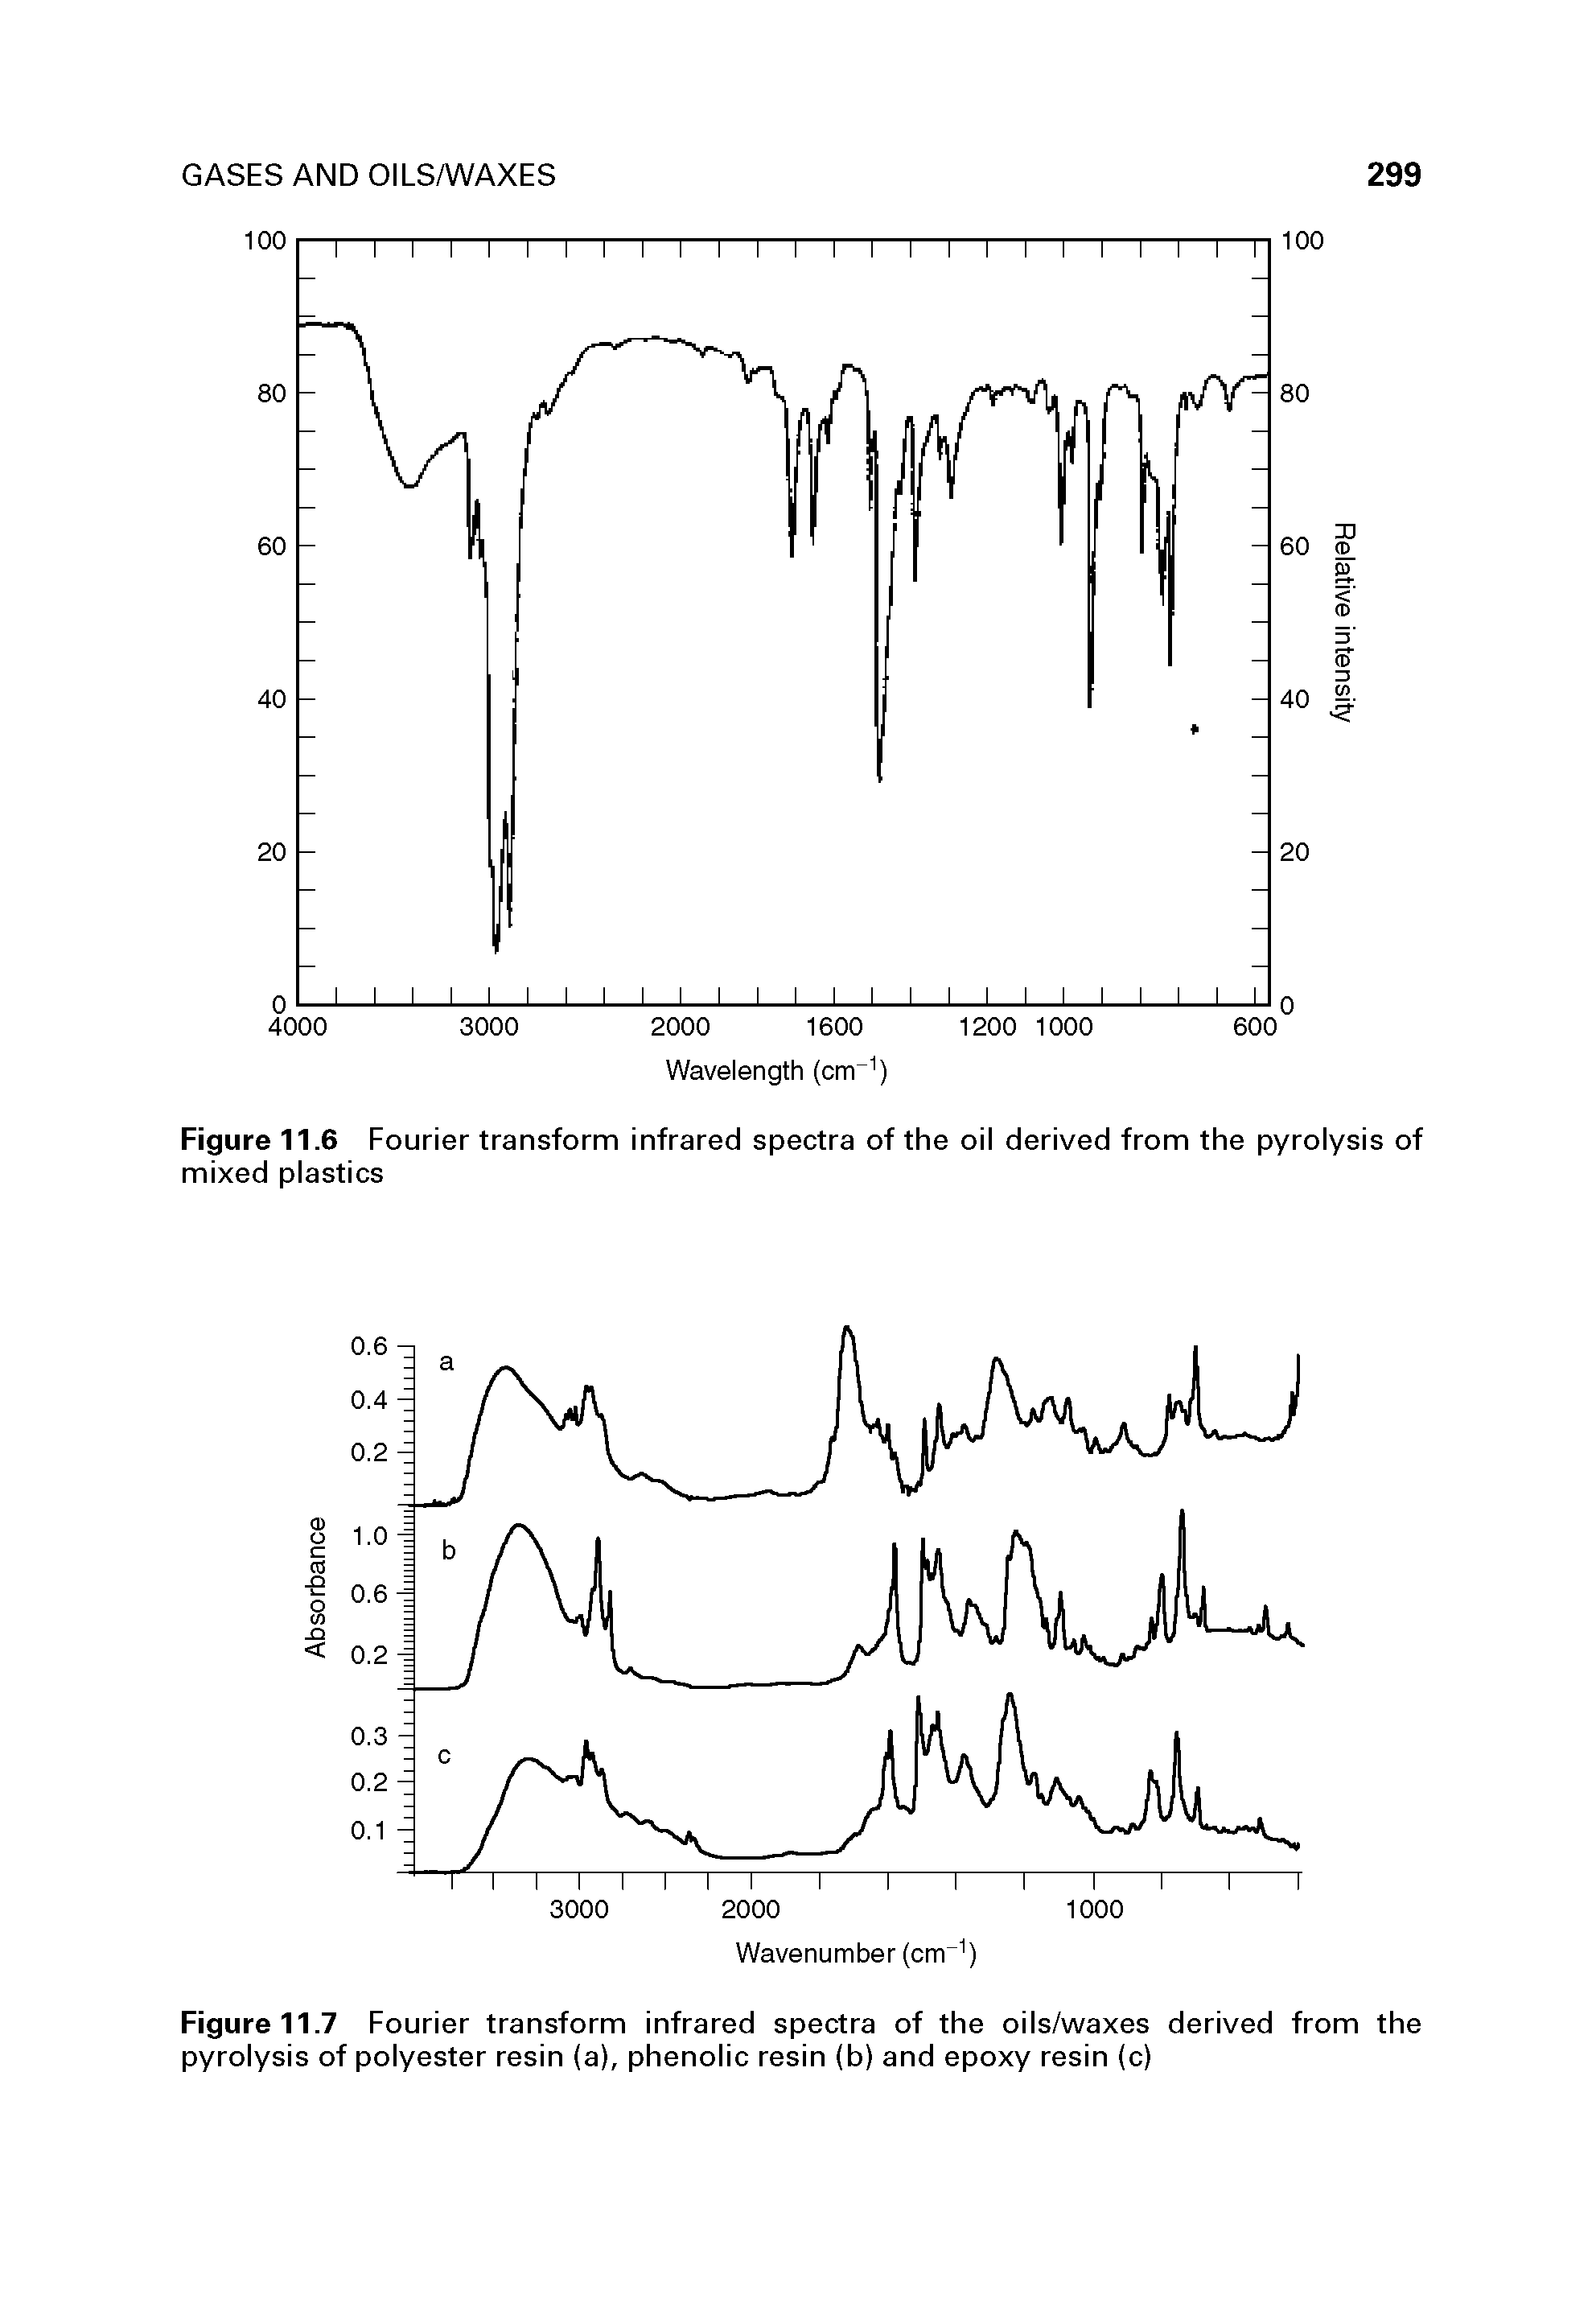 Figure 11.7 Fourier transform infrared spectra of the oils/waxes derived from the pyrolysis of polyester resin (a), phenolic resin (b) and epoxy resin (c)...